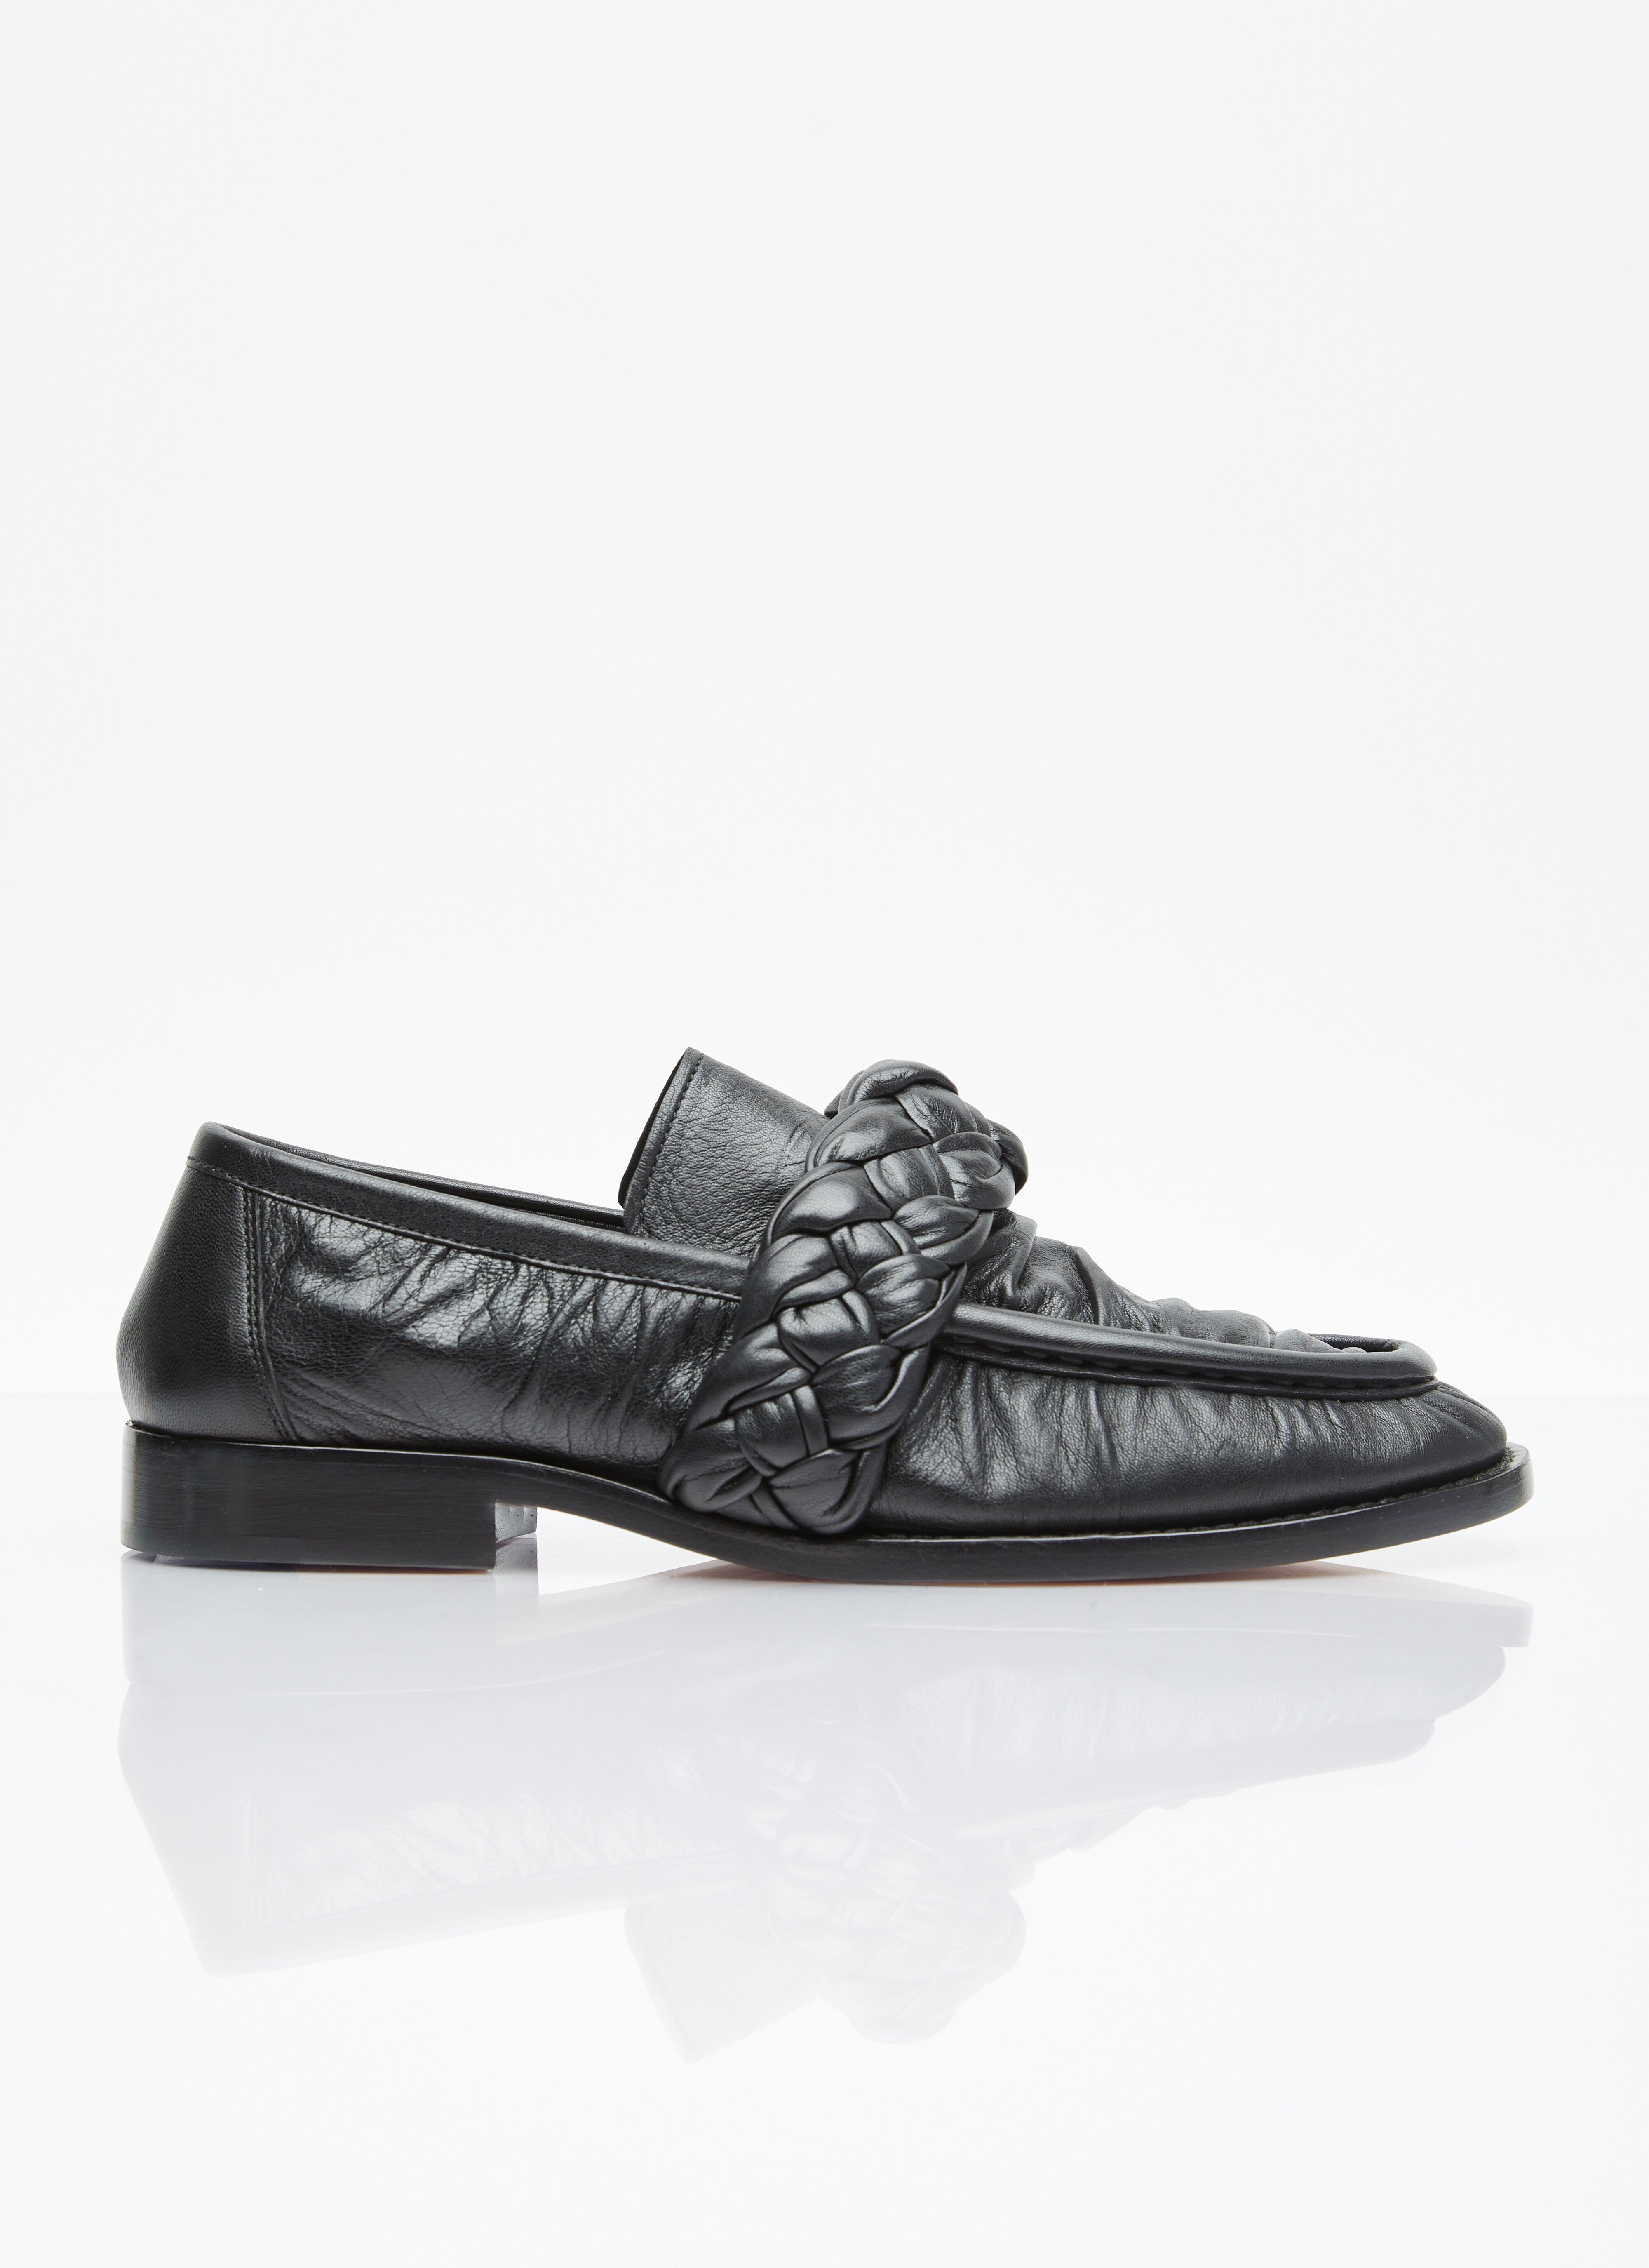 Gucci Knotted Leather Loafers Black guc0255061